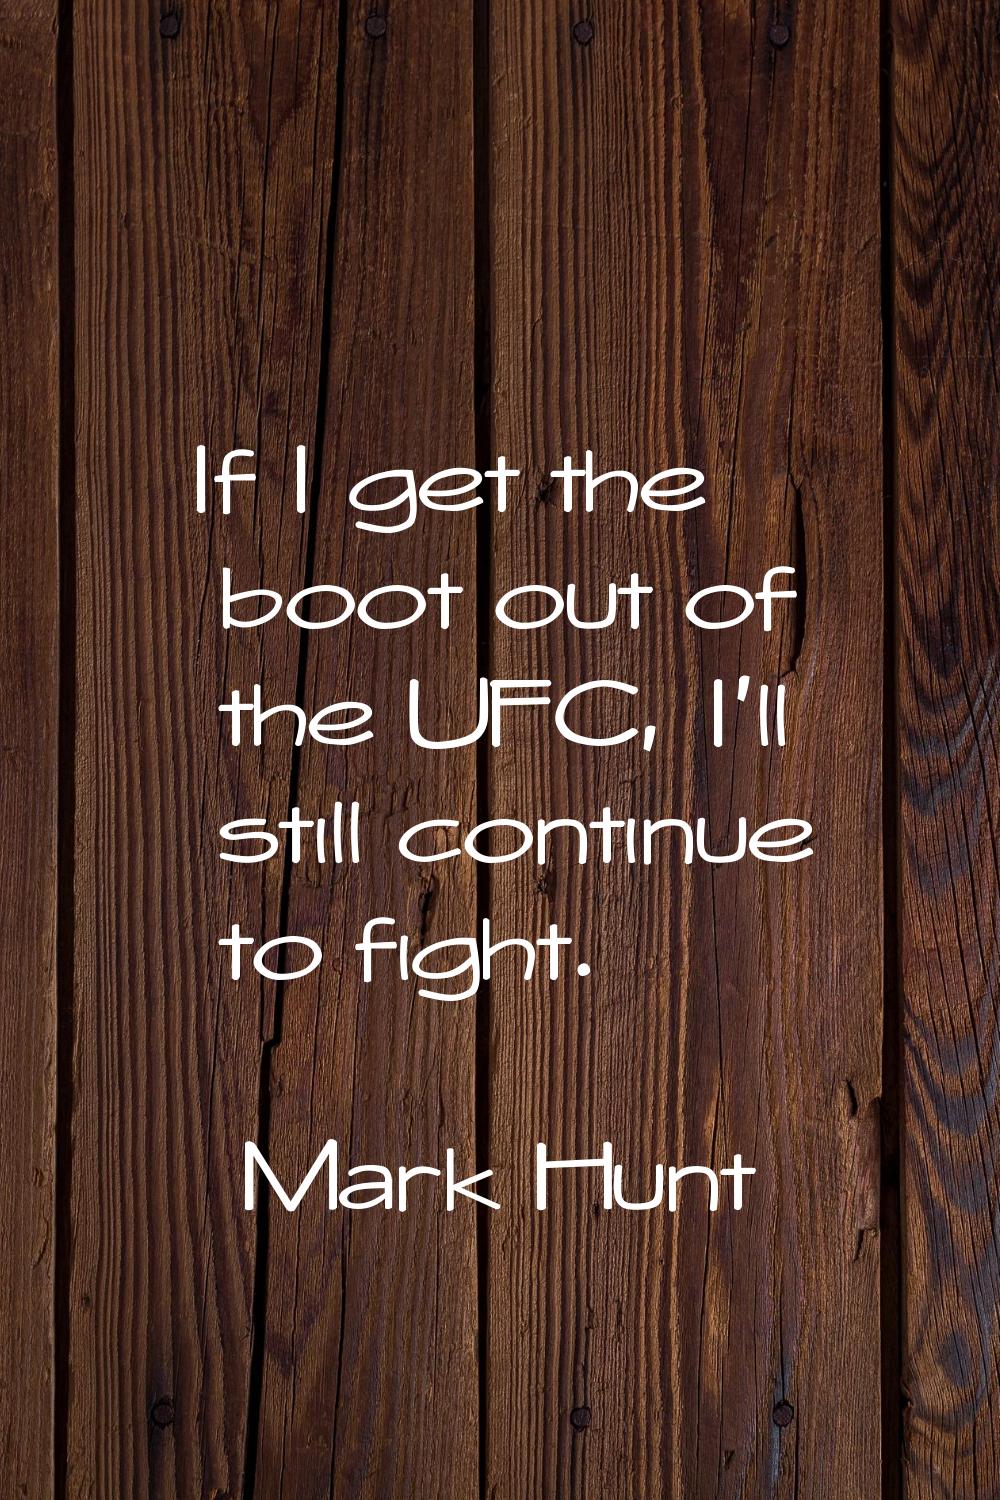 If I get the boot out of the UFC, I'll still continue to fight.